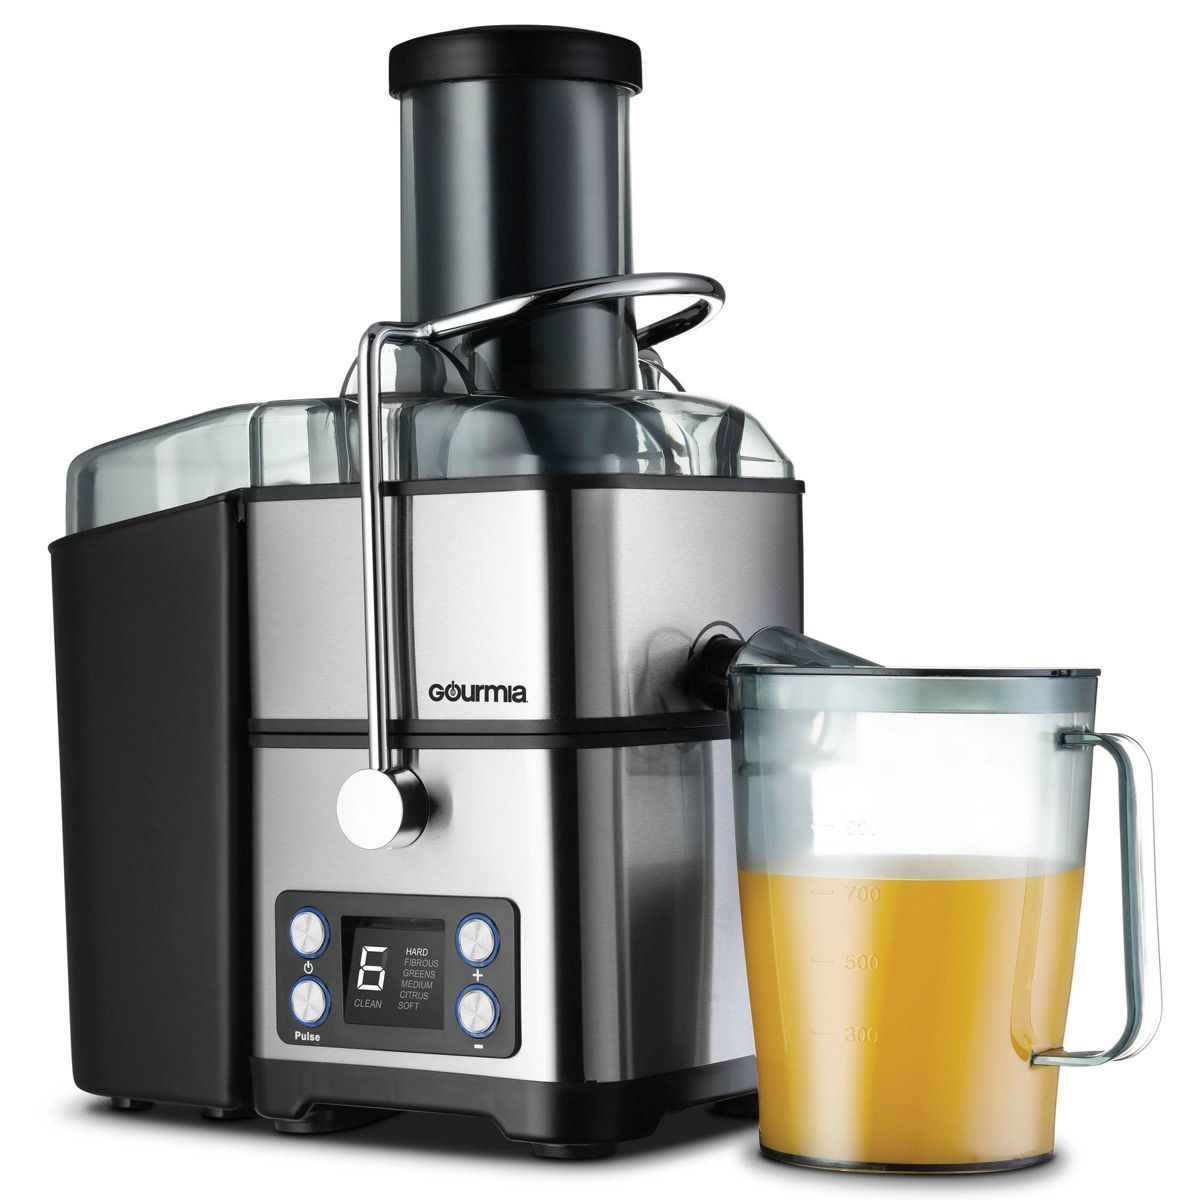 Gourmia 6 Speed Big Mouth Extraction Digital Juicer with Self-Cleaning Cycle | Target